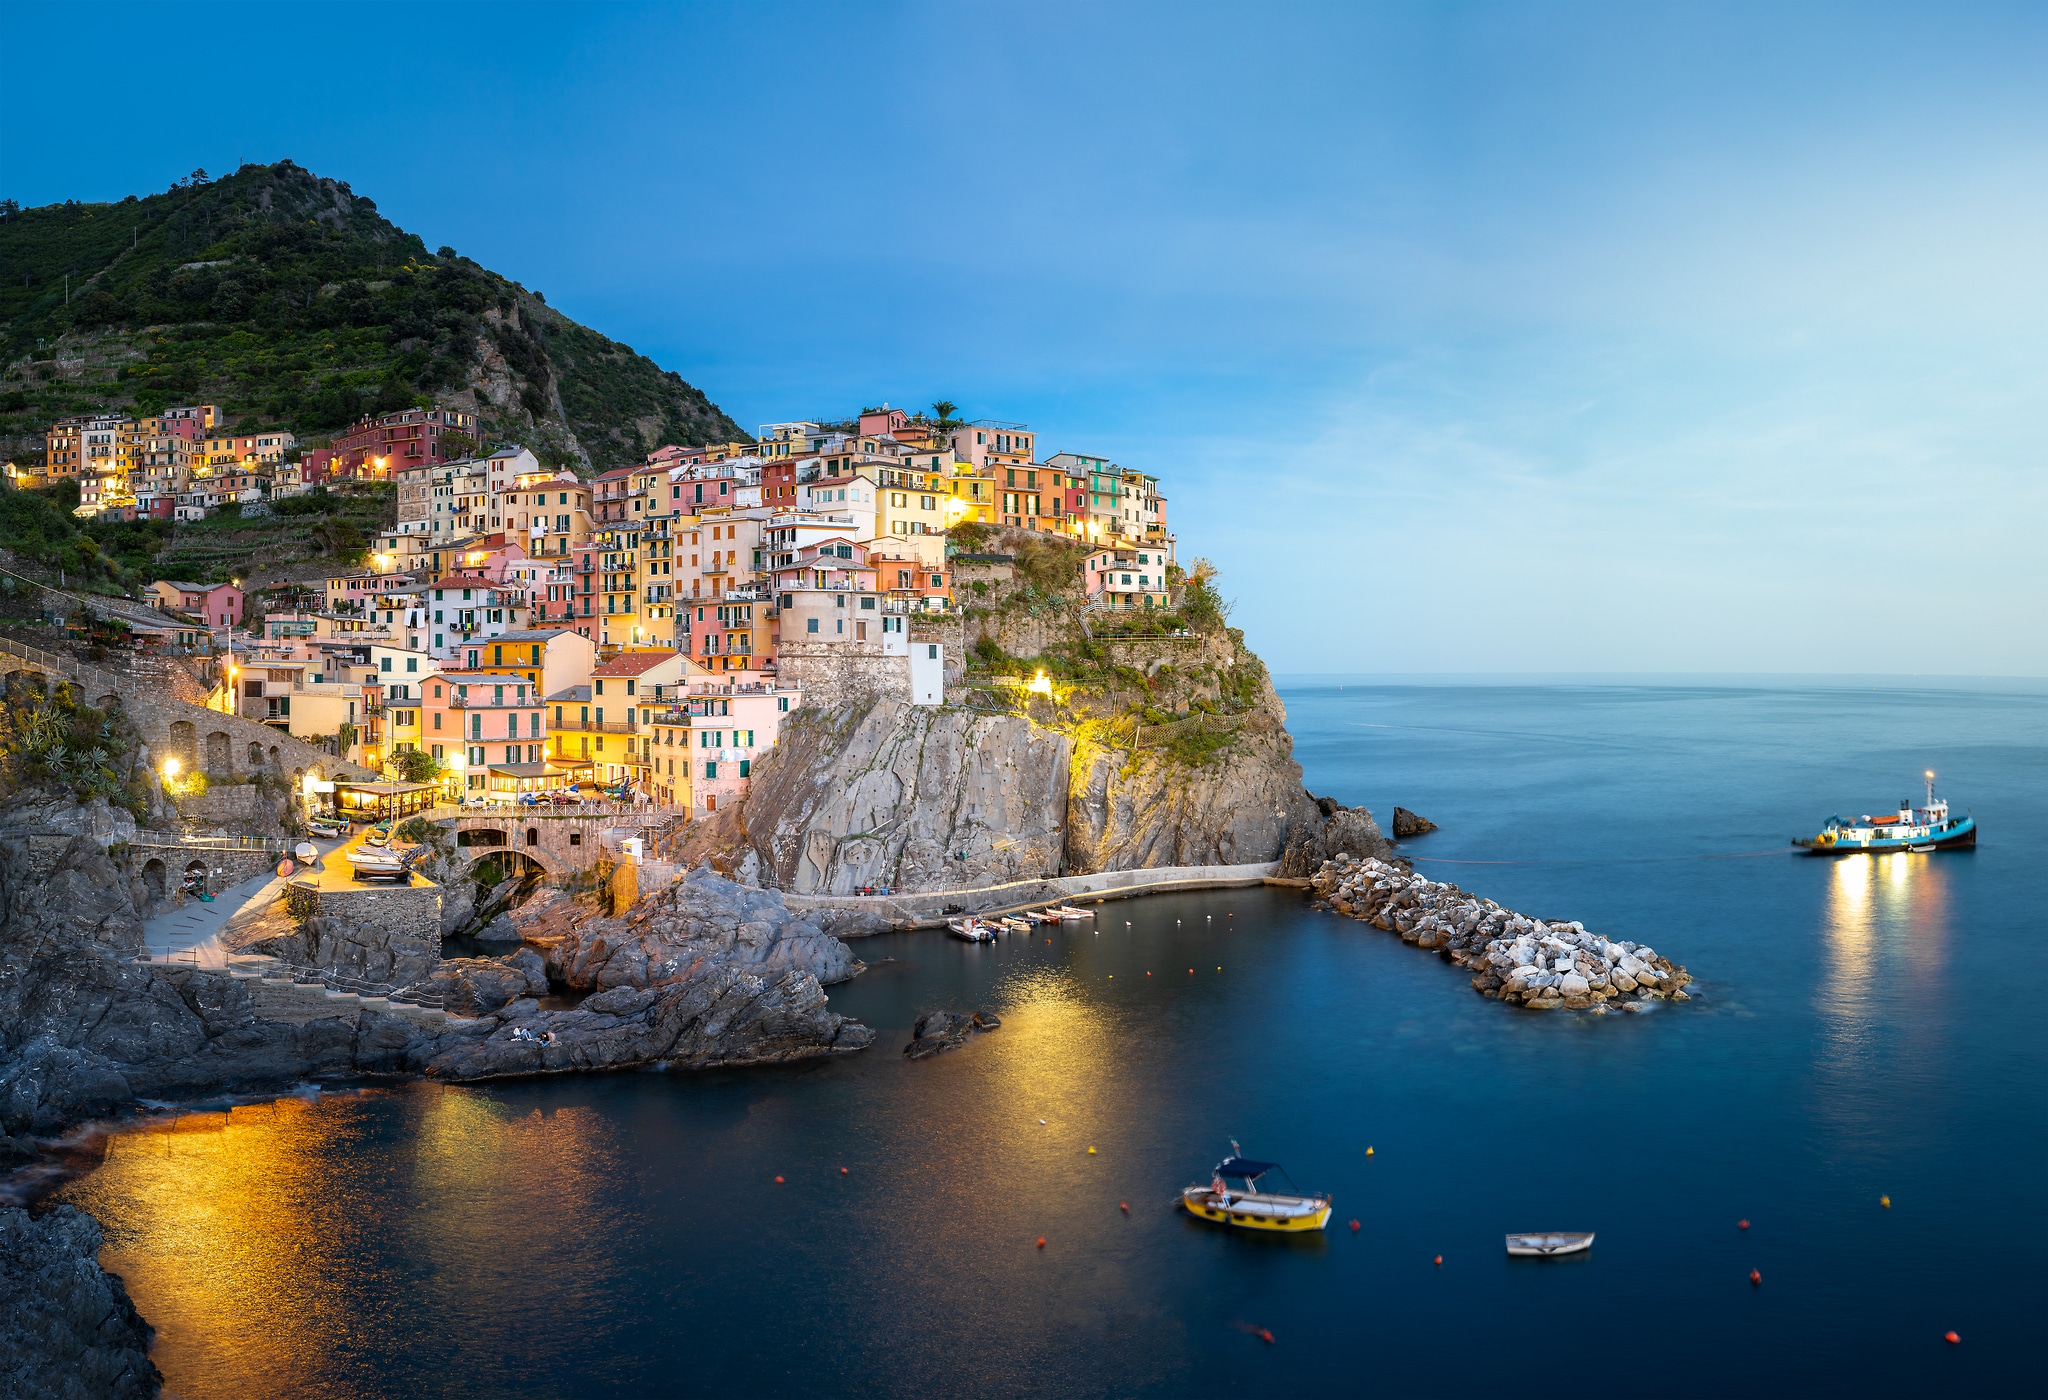 352 megapixels! A very high resolution, large-format art photo print of the coast of Italy at dusk with houses on rocky cliffs next to the Mediterranean Sea; seascape photograph created by Justin Katz in Manarola, Cinque Terre, Italy.